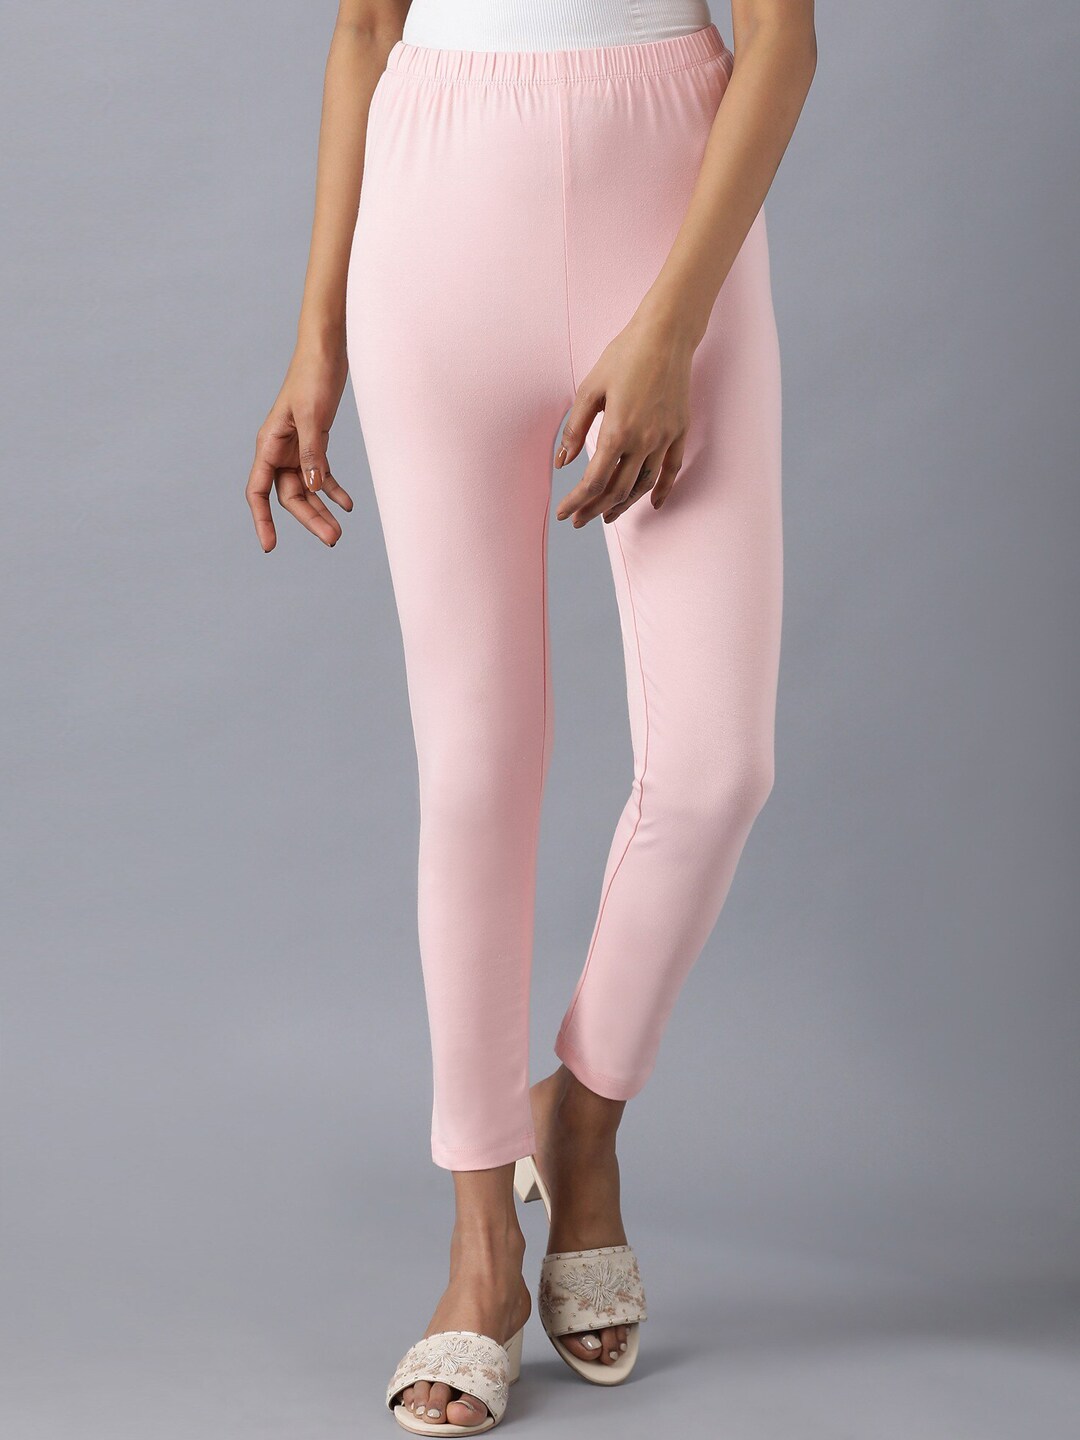 elleven Women Pink Solid Ankle Length Leggings Price in India